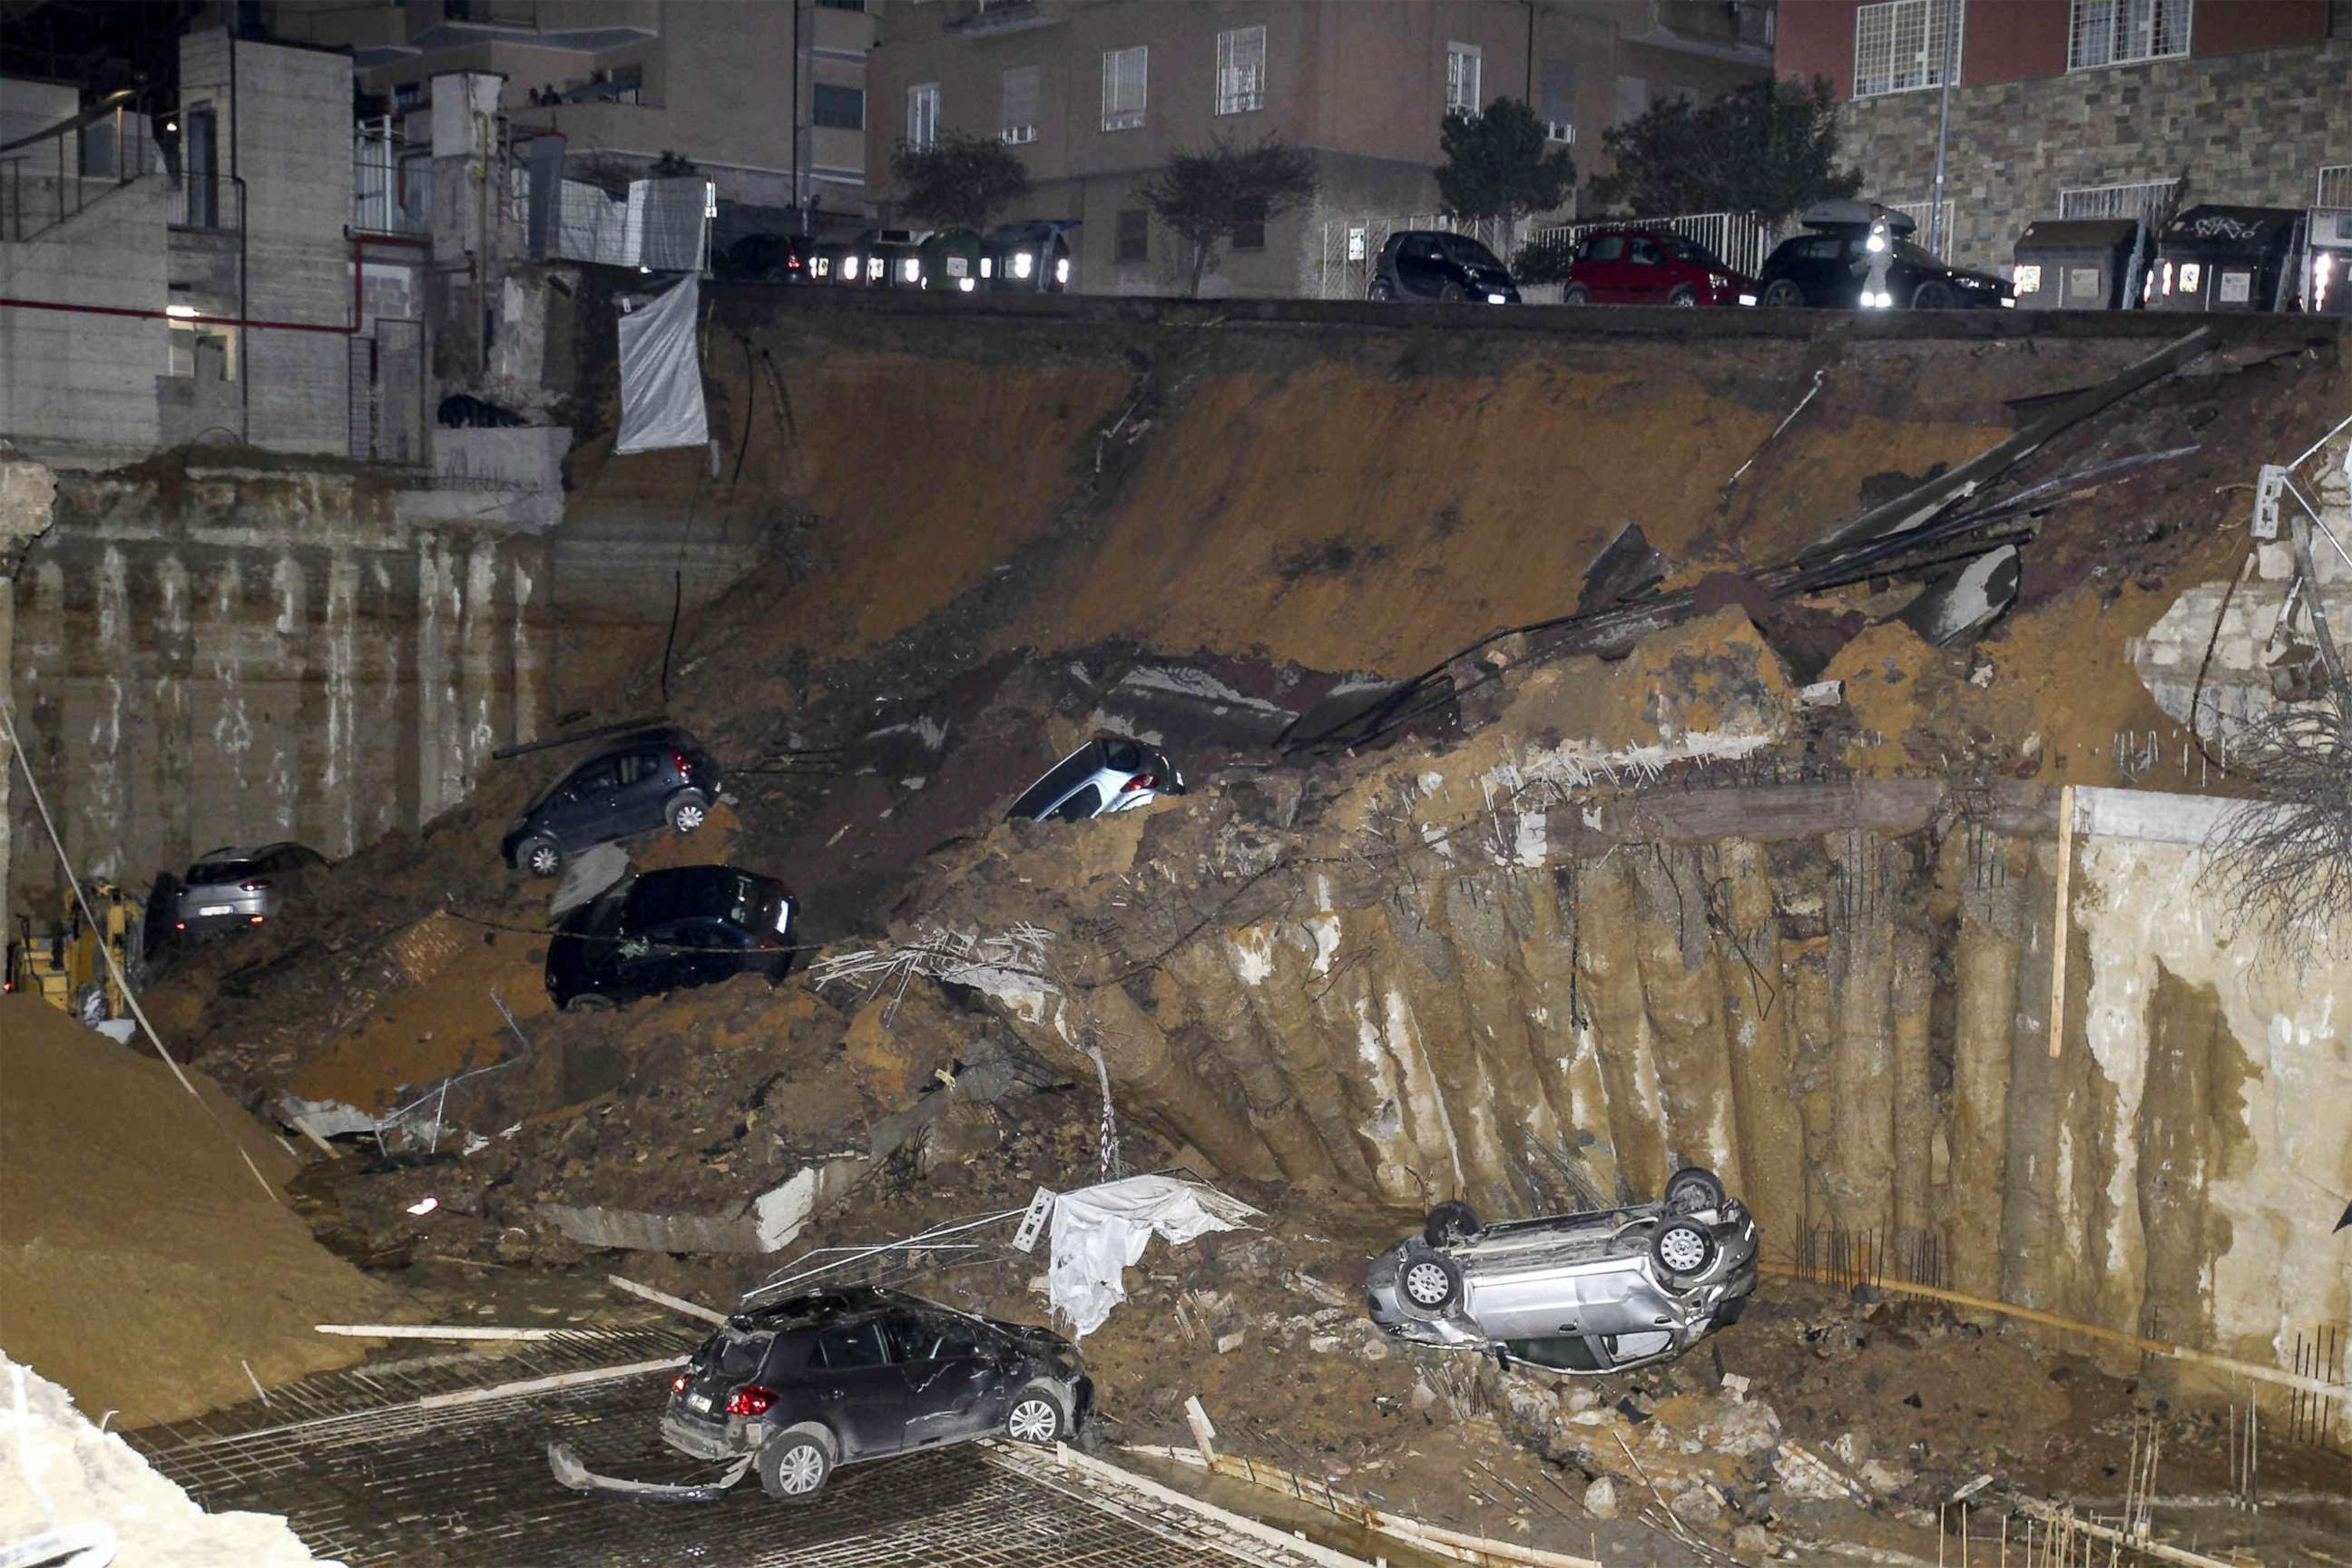 PHOTO: A view is captured of a large sinkhole that opened in a street of a residential area in Rome, on Feb. 14, 2018. 
